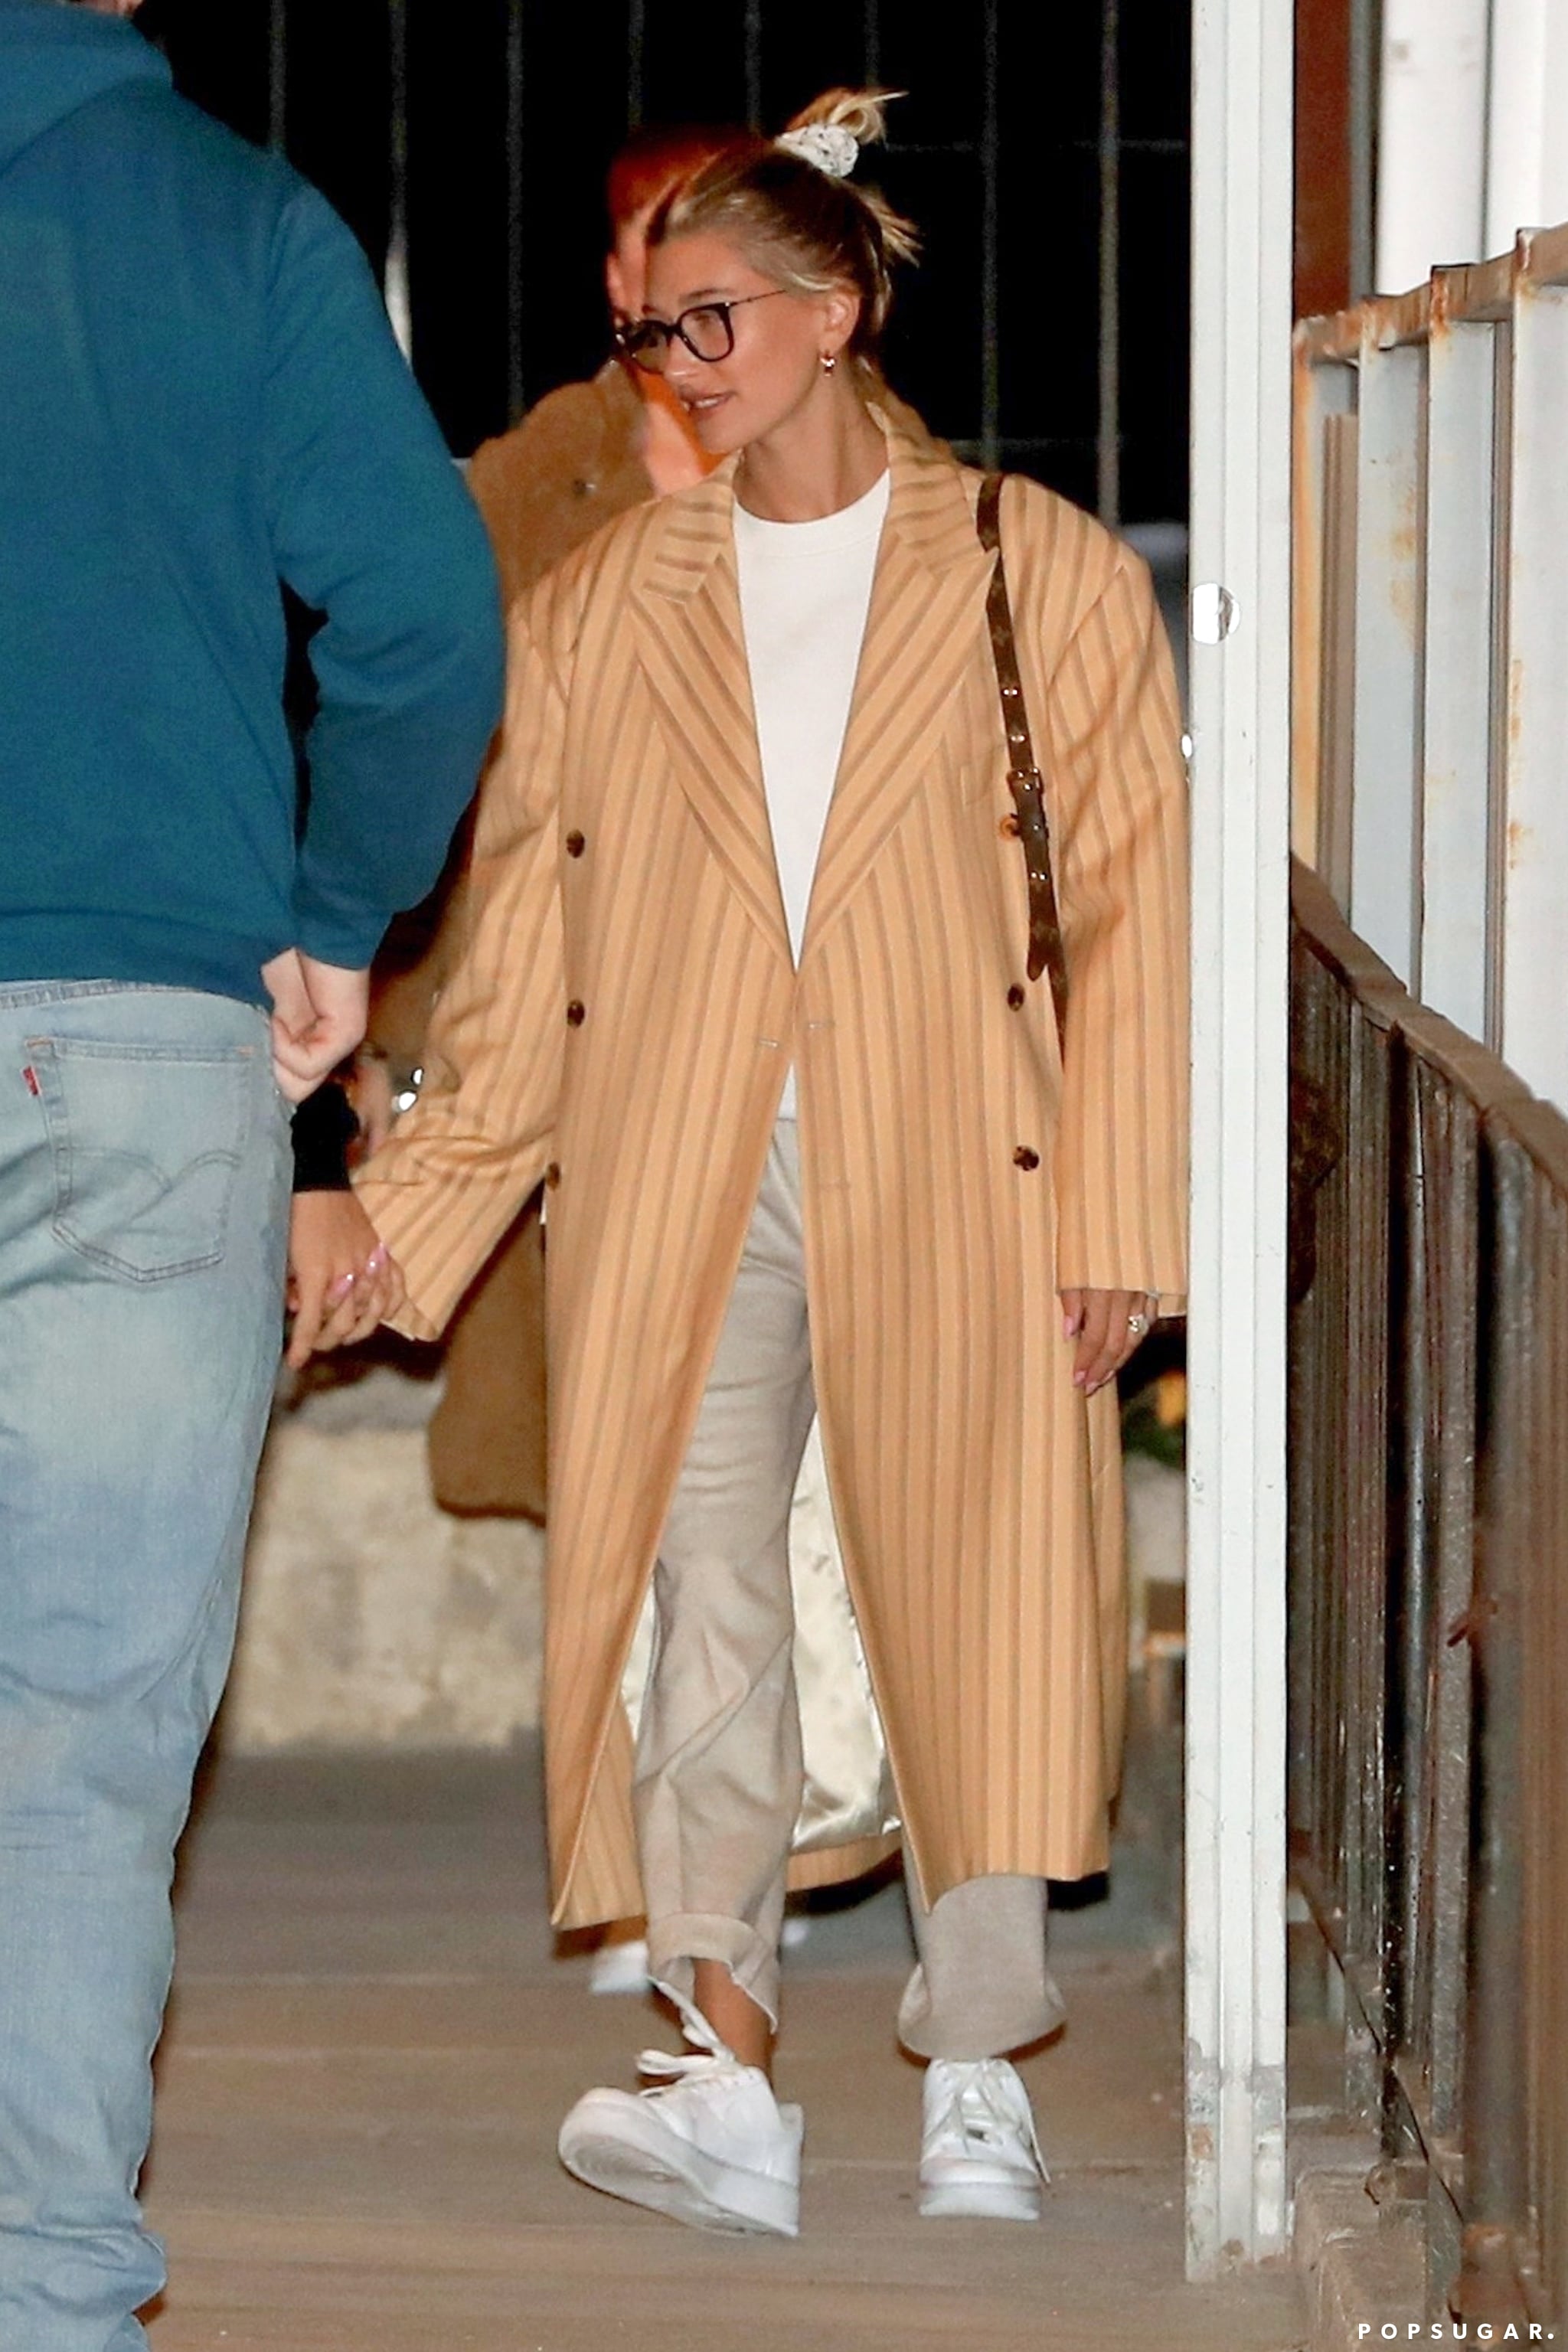 Hailey Bieber wears a beige long coat and Nike Air Force 1s as she steps out